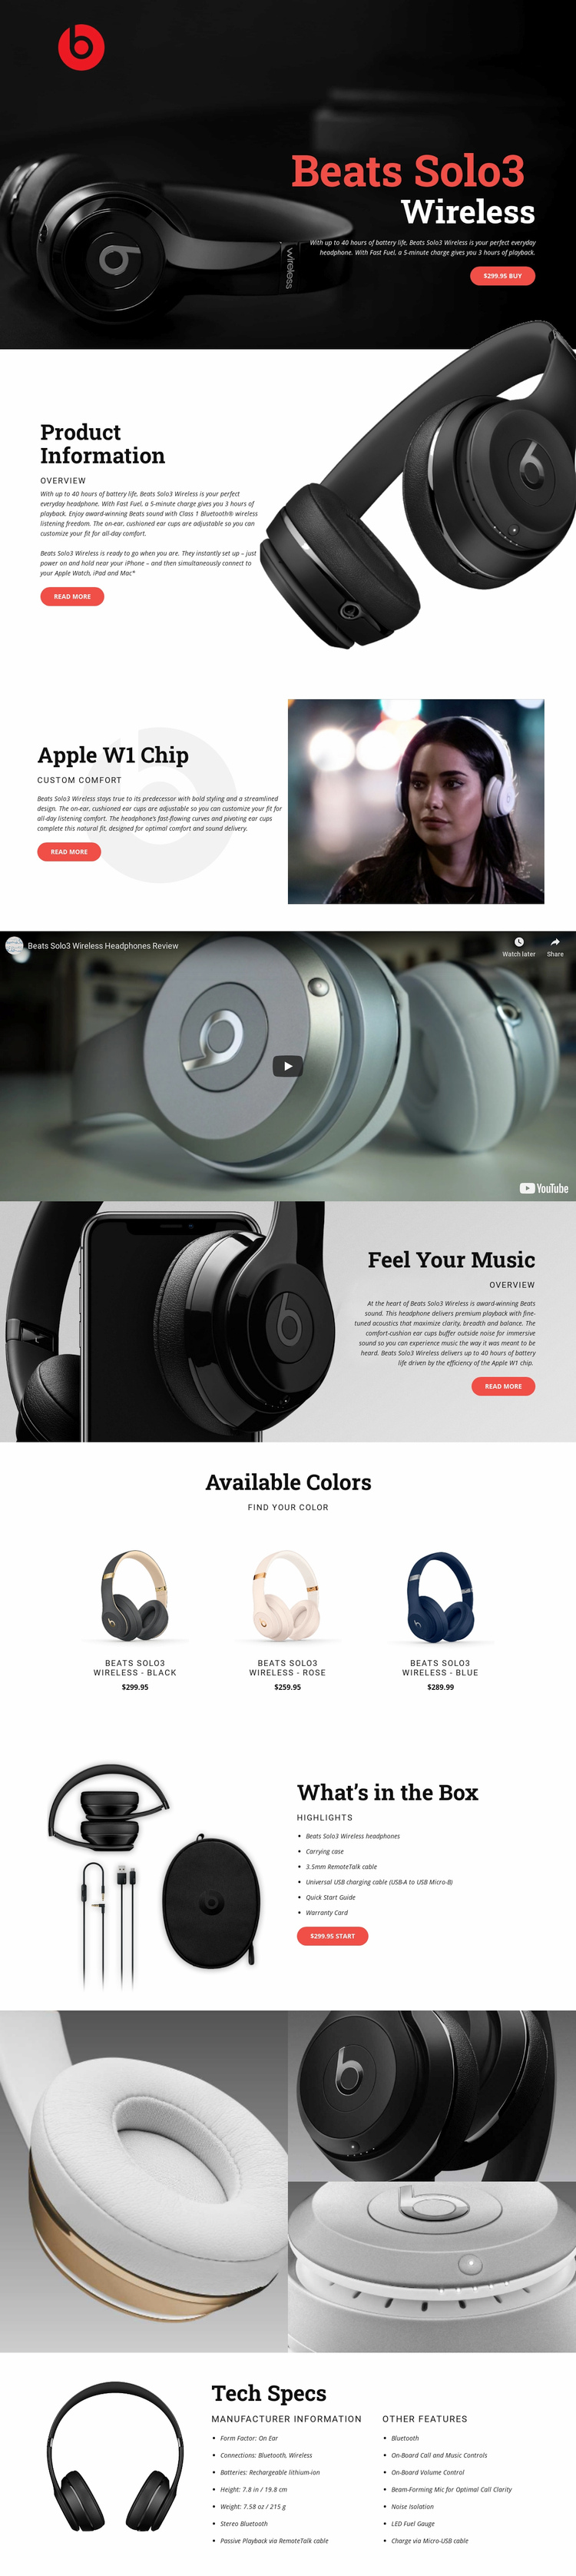 Outstanding quality of music Squarespace Template Alternative